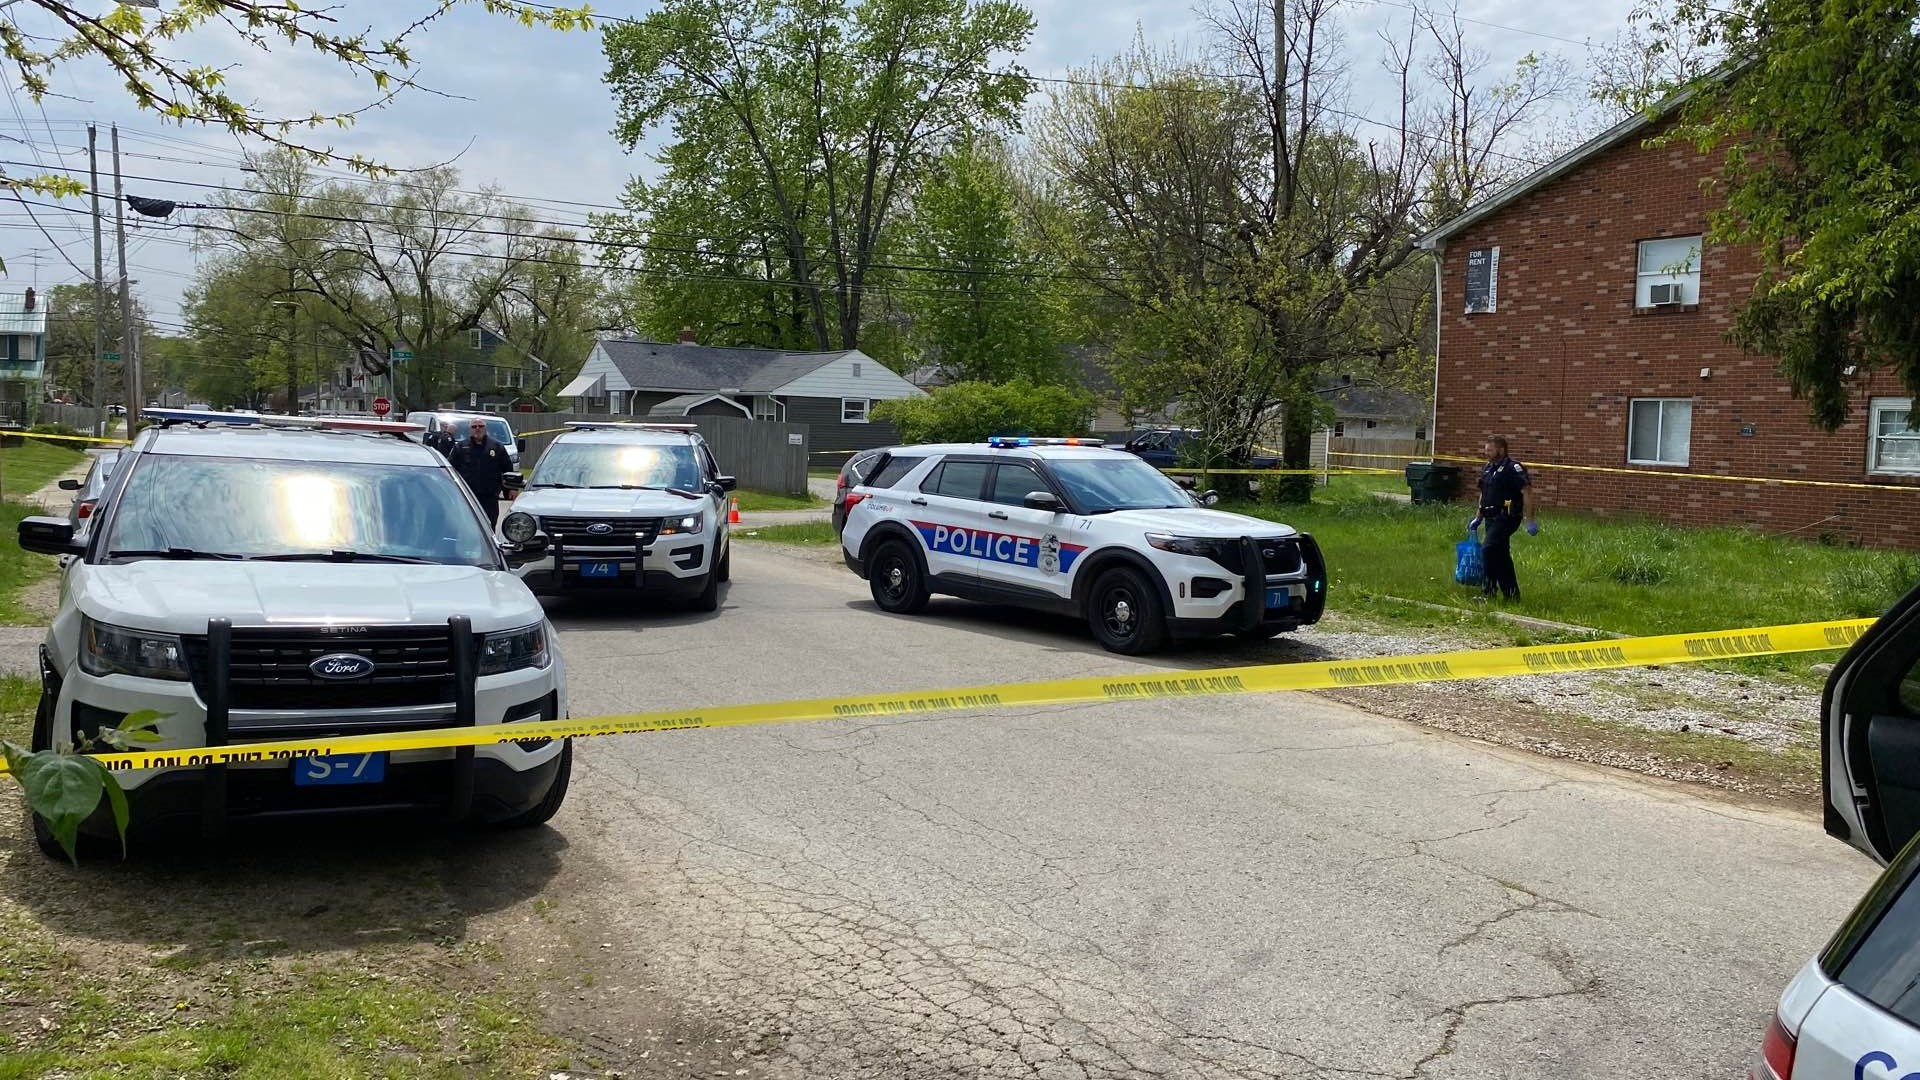 Officers were called to the 700 block of Northview Avenue off of East 5th Avenue around 12:30 p.m. for a reported shooting and crash.